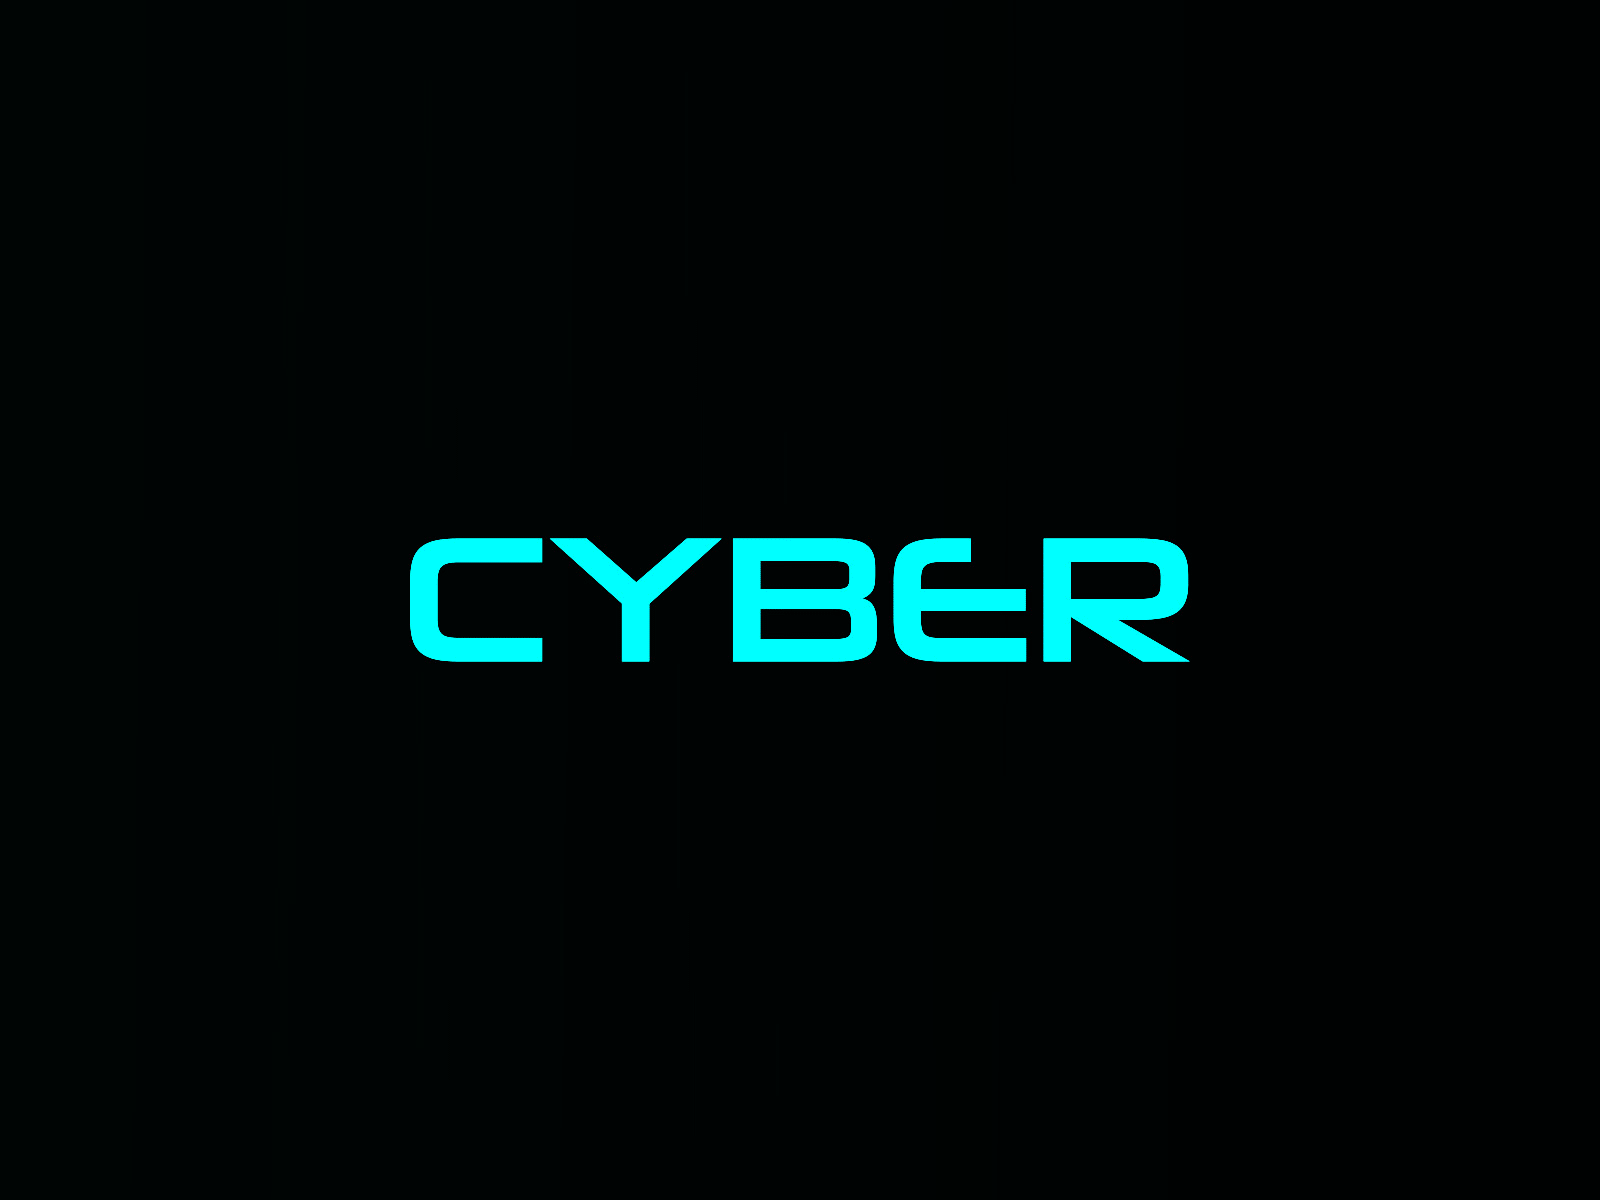 Cyber title animation animation branding concept cyber design illustration logo morph animation morphing typography